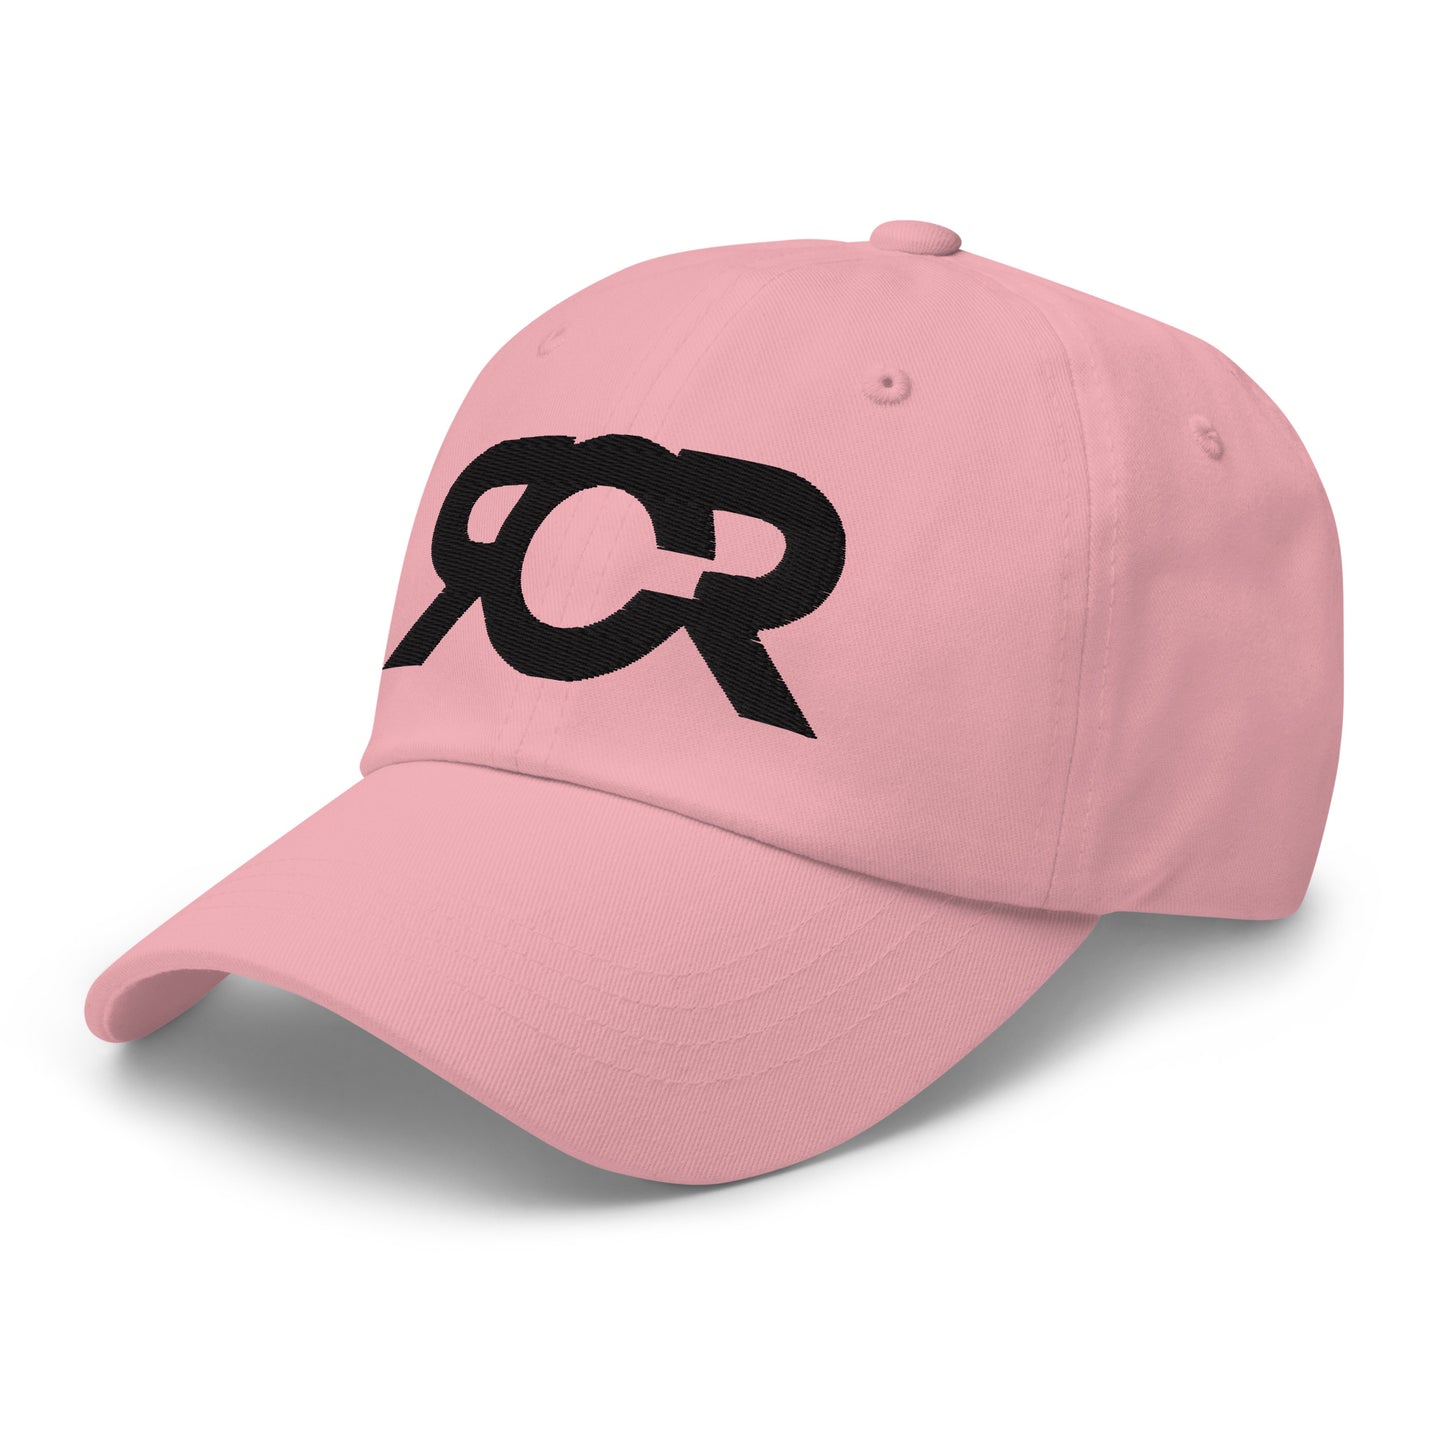 RCR Dad Hat with 3D Embroidered RCR